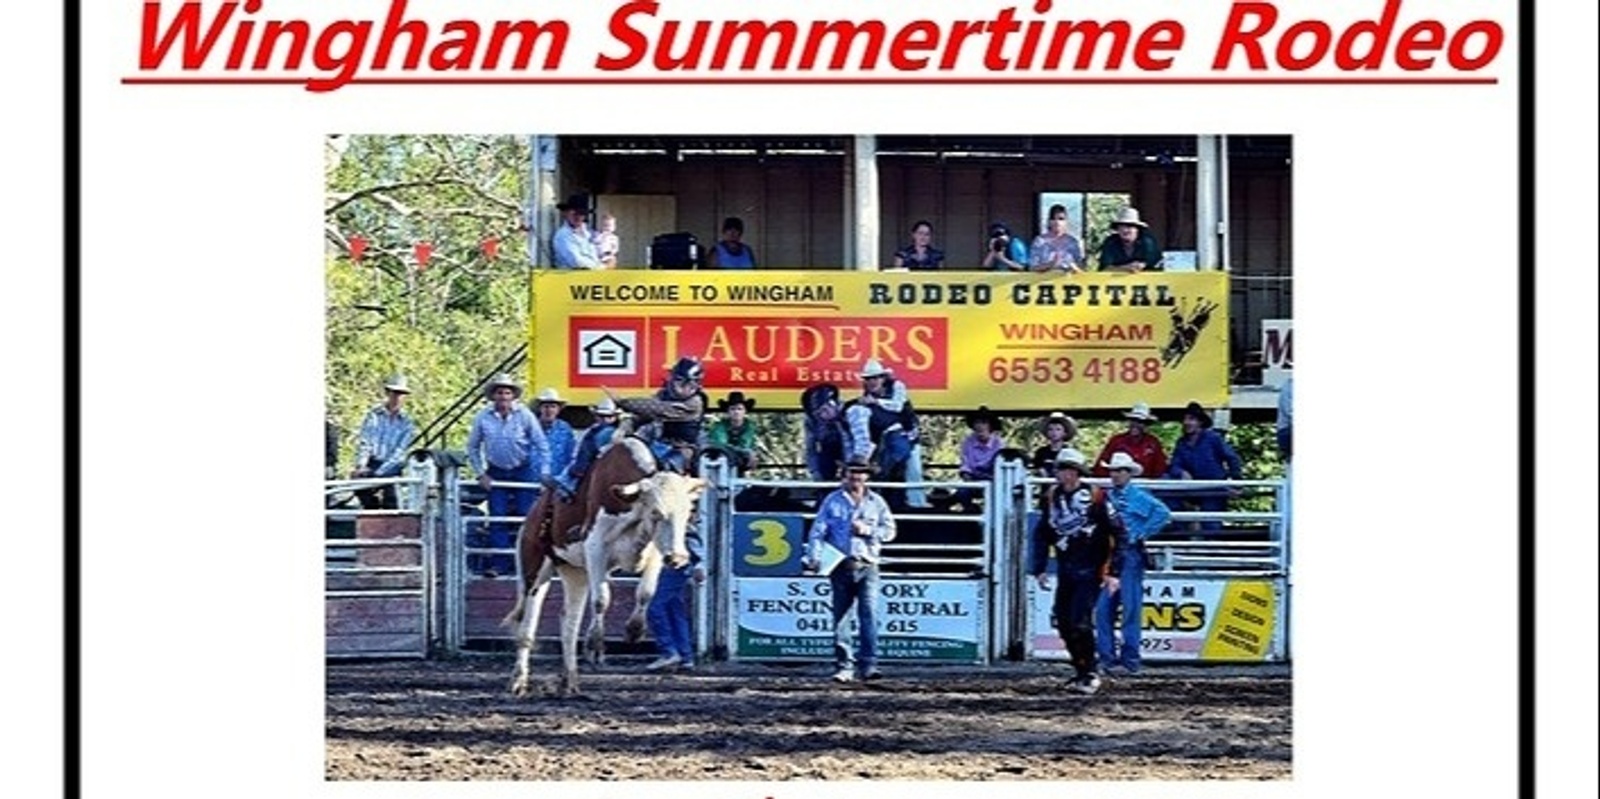 Banner image for Transport to Wingham Summertime Rodeo